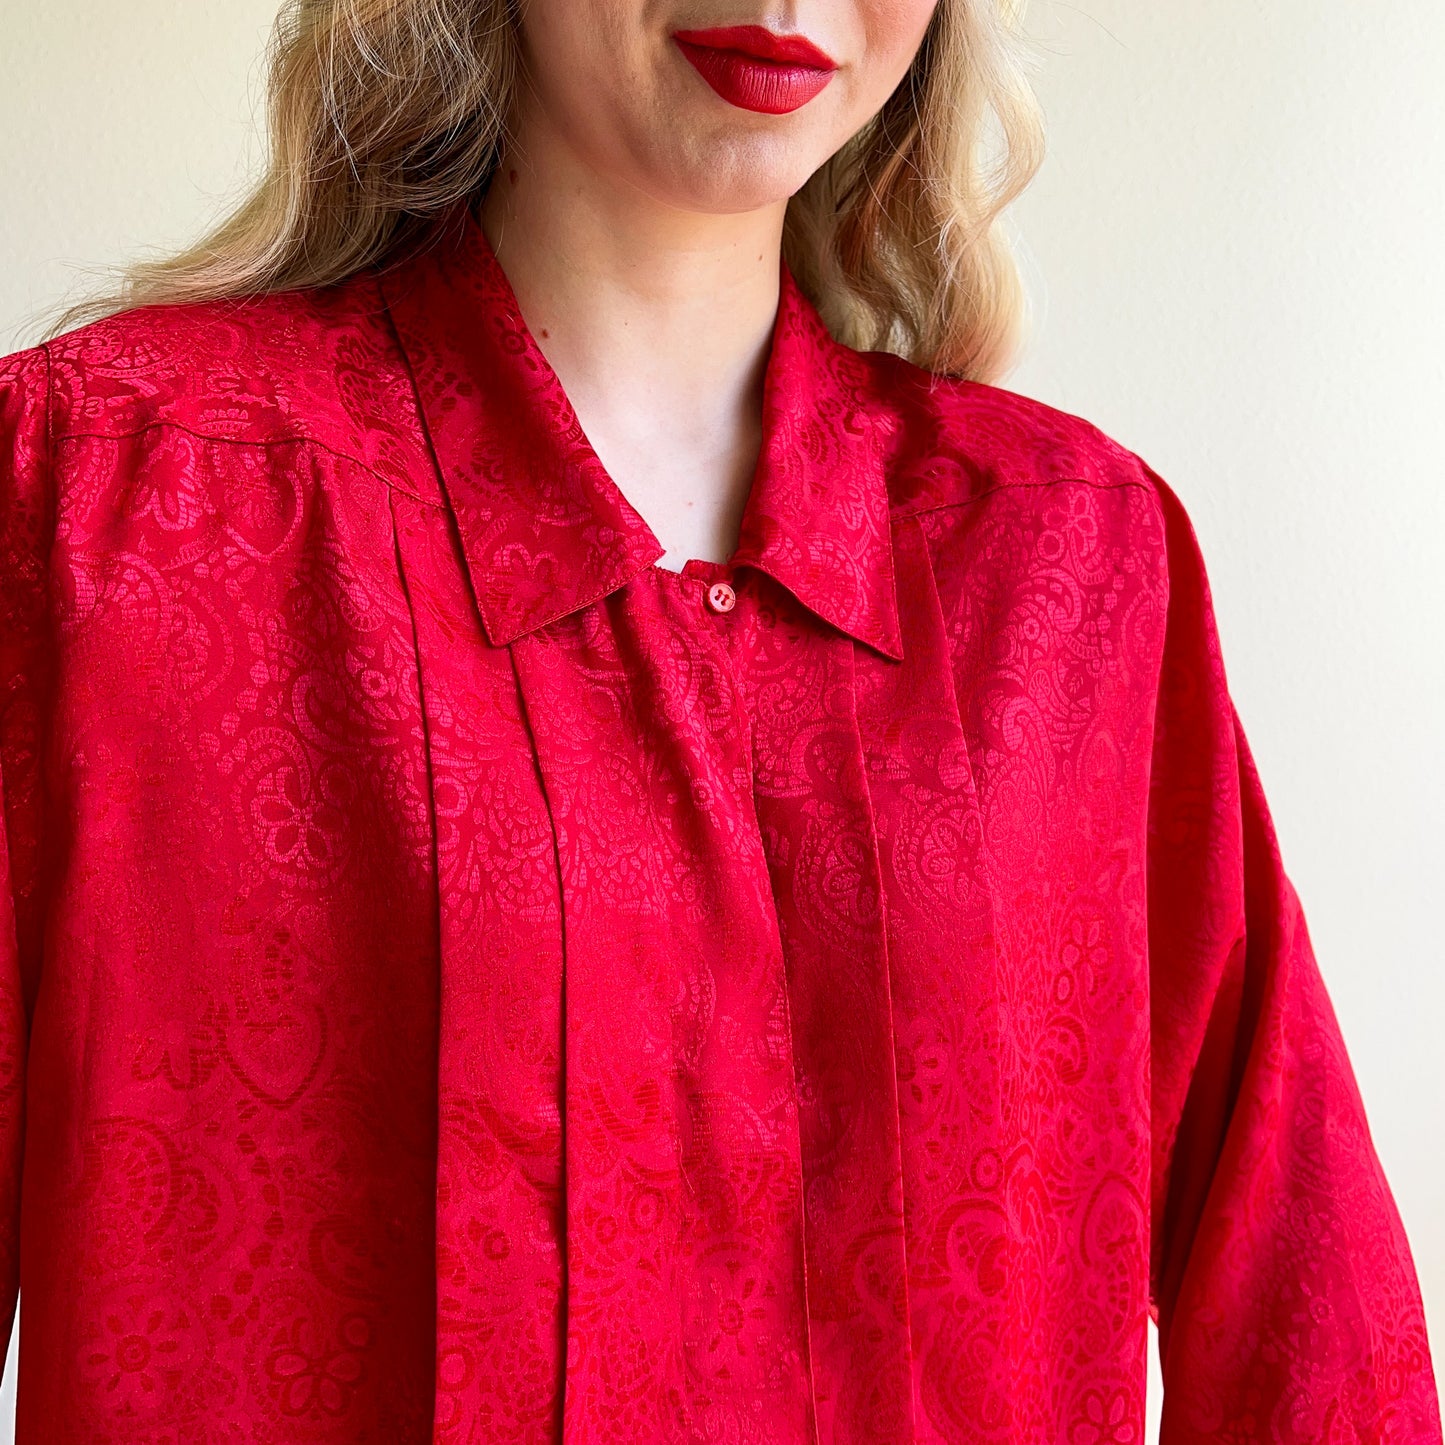 1980s Red Silk Jacquard Buttoned Blouse (L/XL)